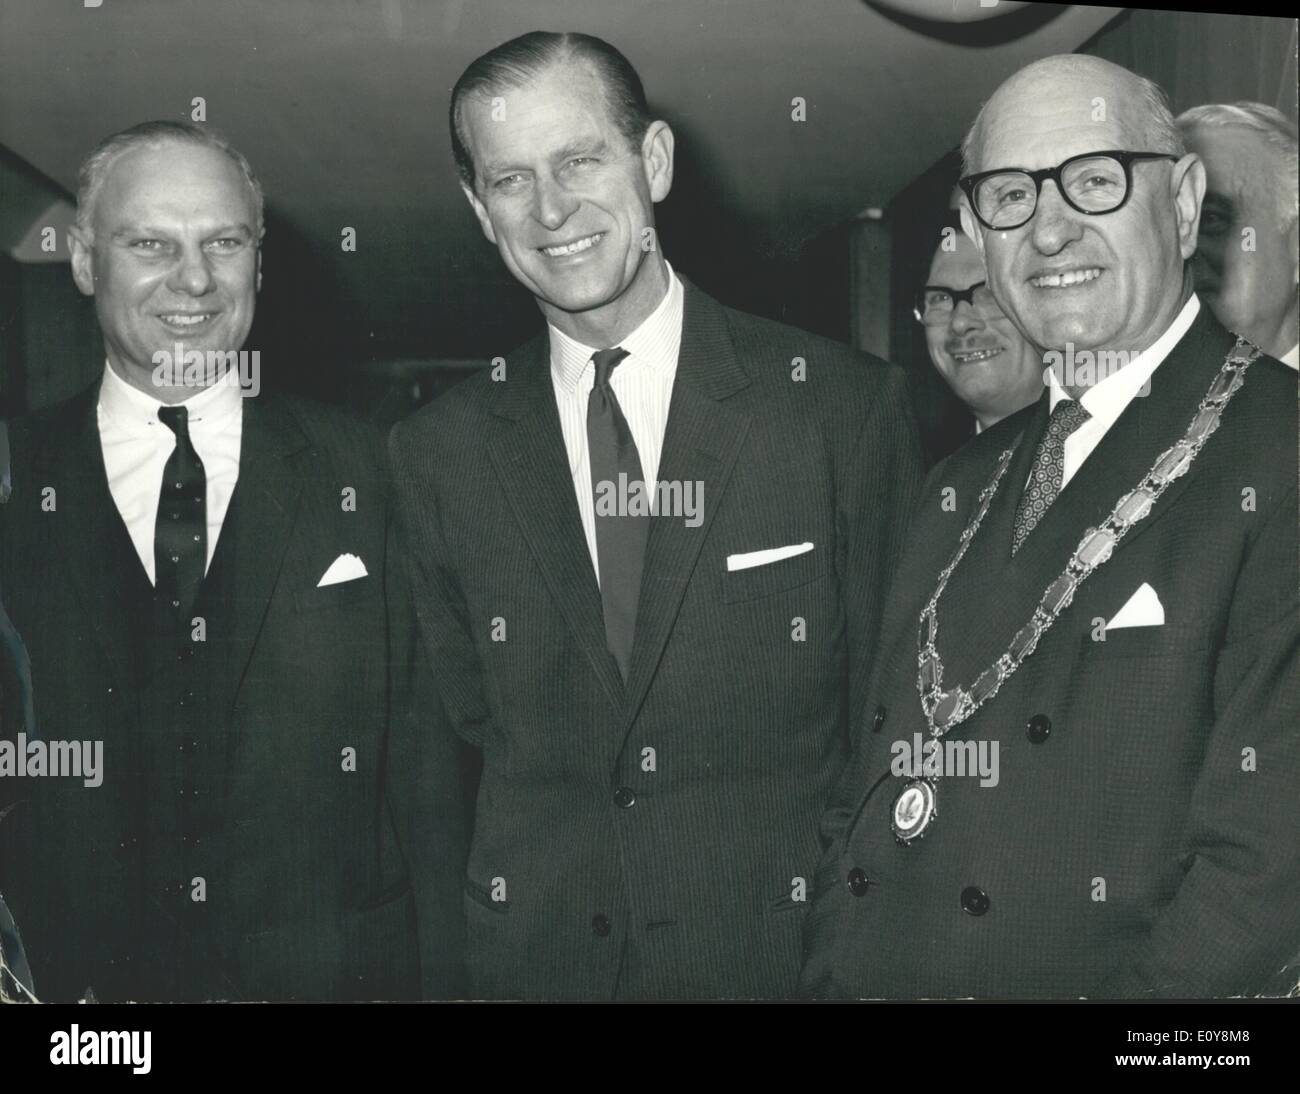 Feb. 02, 1969 - Prince Philip At U.S.C.C. Lunch: London: Prince Philip flanked by Stuart W. Don, president of the American Chamber of Commerce (left) and John Clover, President of the Canadian Chamber of Commerce given for the Prince by the two Chambers at the Grosvenor House Hotel Today. Stock Photo